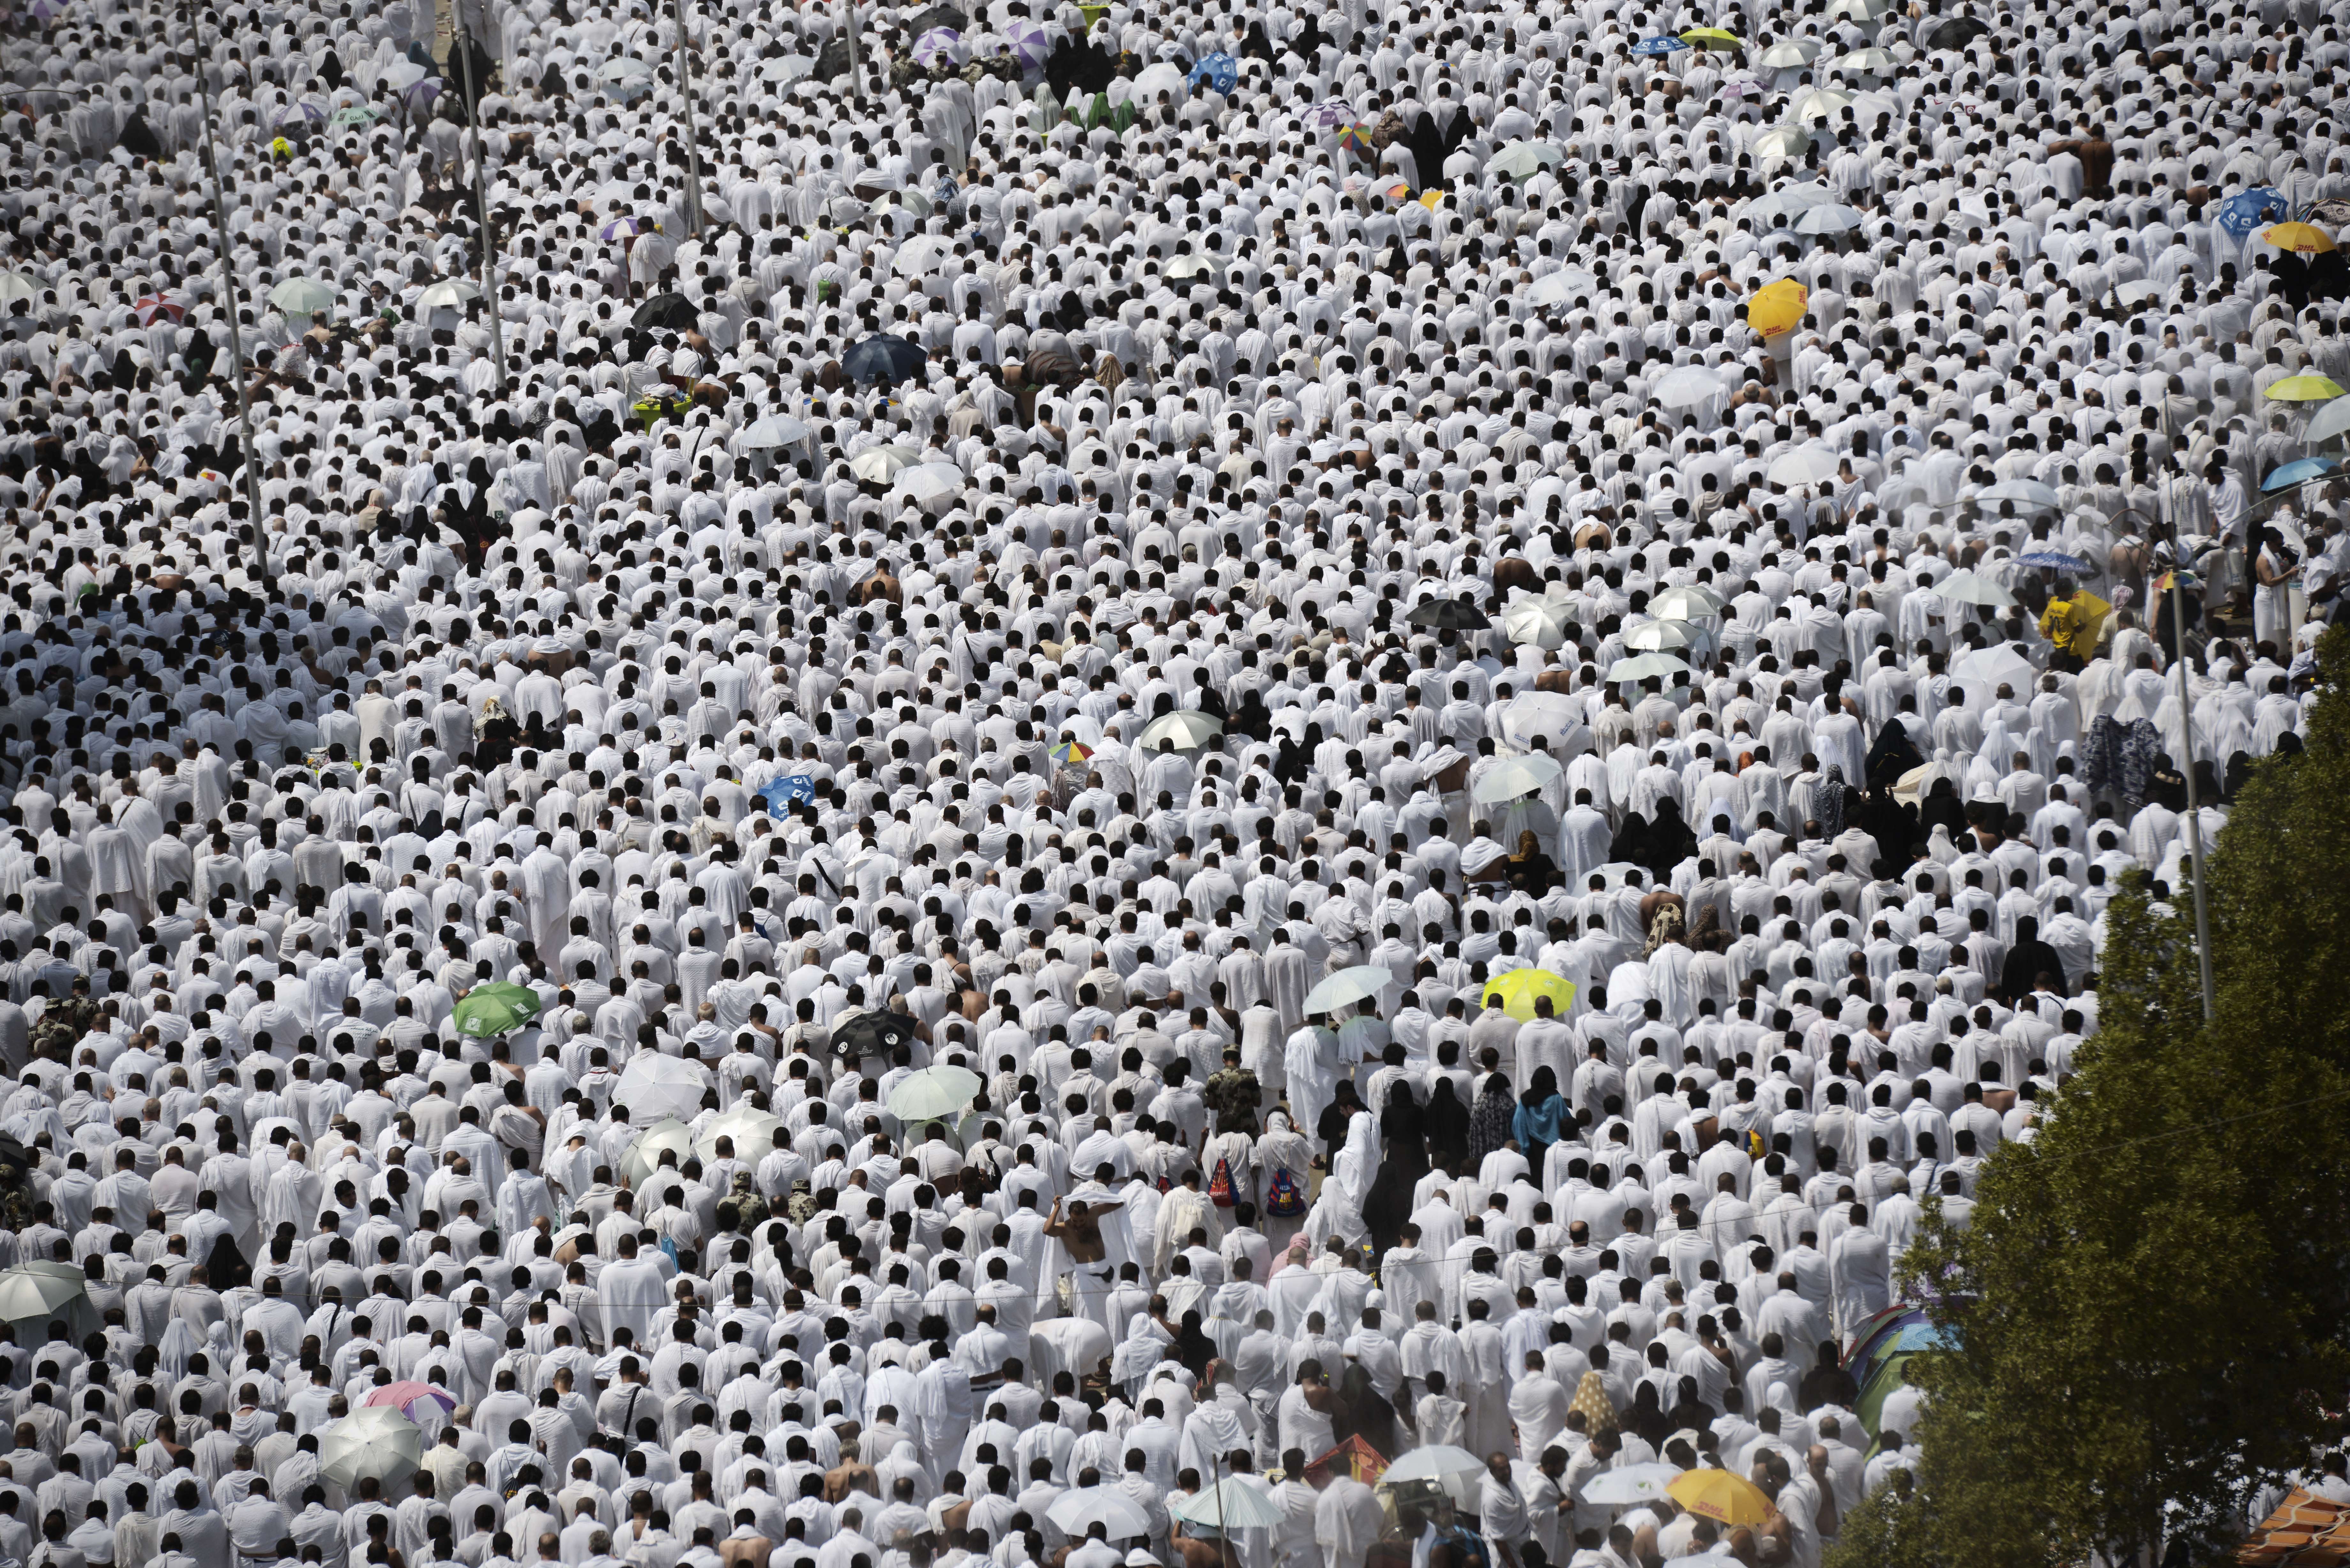 Muslim pilgrims gather to perform noon and afternoon prayers at Namira Mosque in Mount Arafat, southeast of the Saudi holy city of Mecca, on September 23, 2015. Arafat Day, on the 9th of the Islamic month of Dhul Hijja, is the climax of the hajj season. Pilgrims gather on the hill known as Mount Arafat, and its surrounding plain, where they remain until evening for prayer and Koran recitals. Prophet Mohammed is believed to have delivered his final hajj sermon there. AFP PHOTO/MOHAMMED AL-SHAIKH        (Photo credit should read MOHAMMED AL-SHAIKH/AFP/Getty Images)